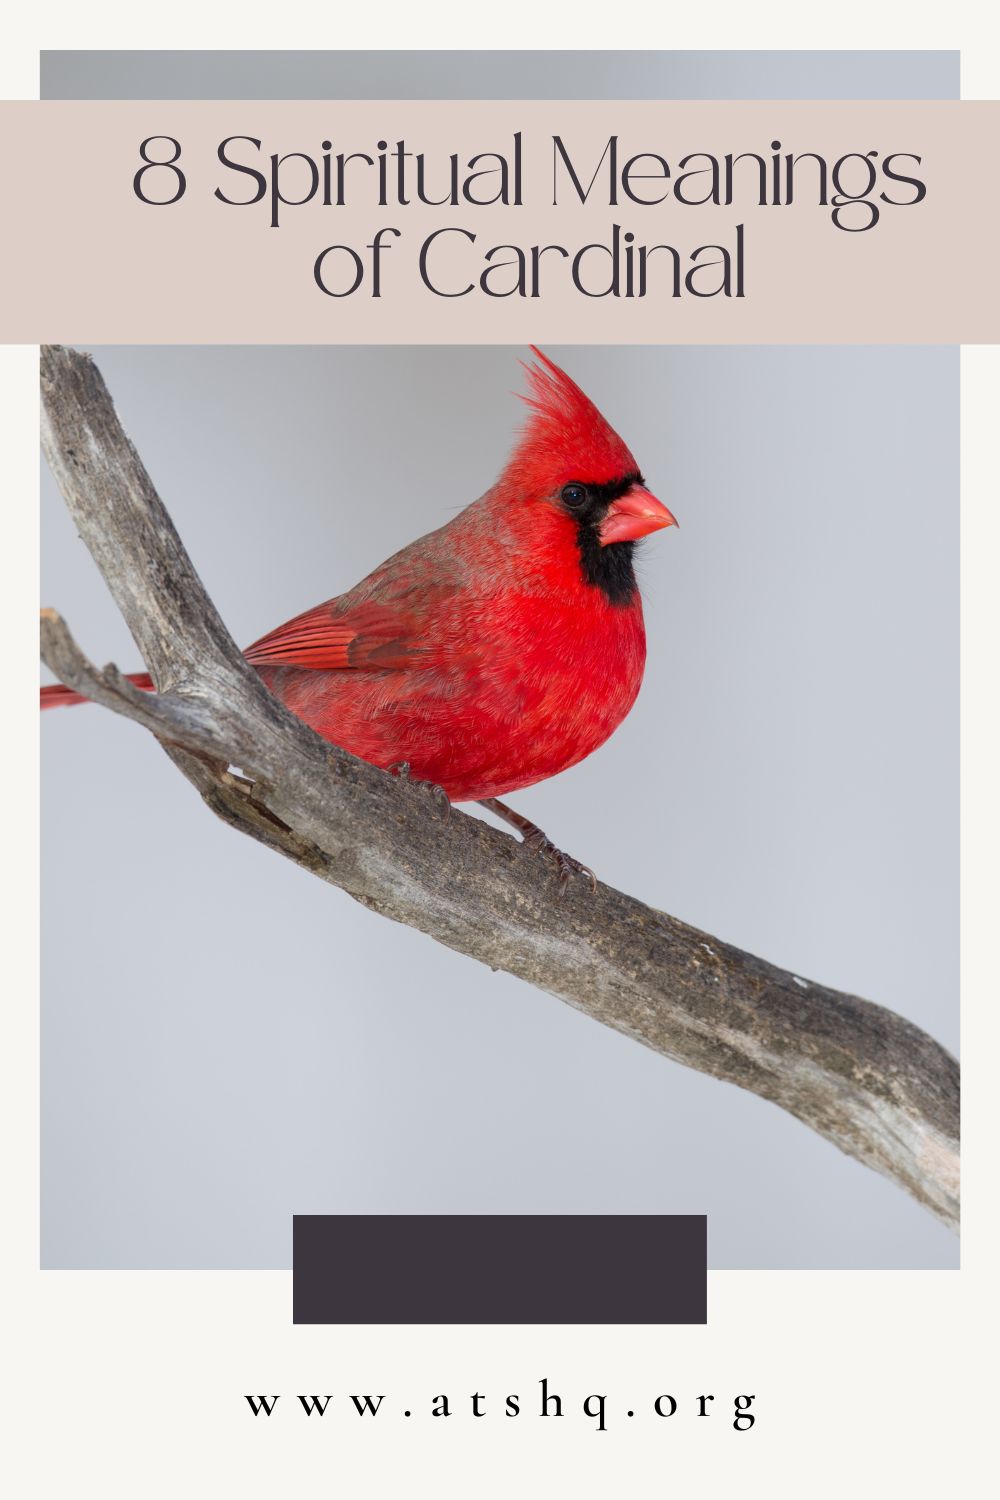 Cardinal Meanings